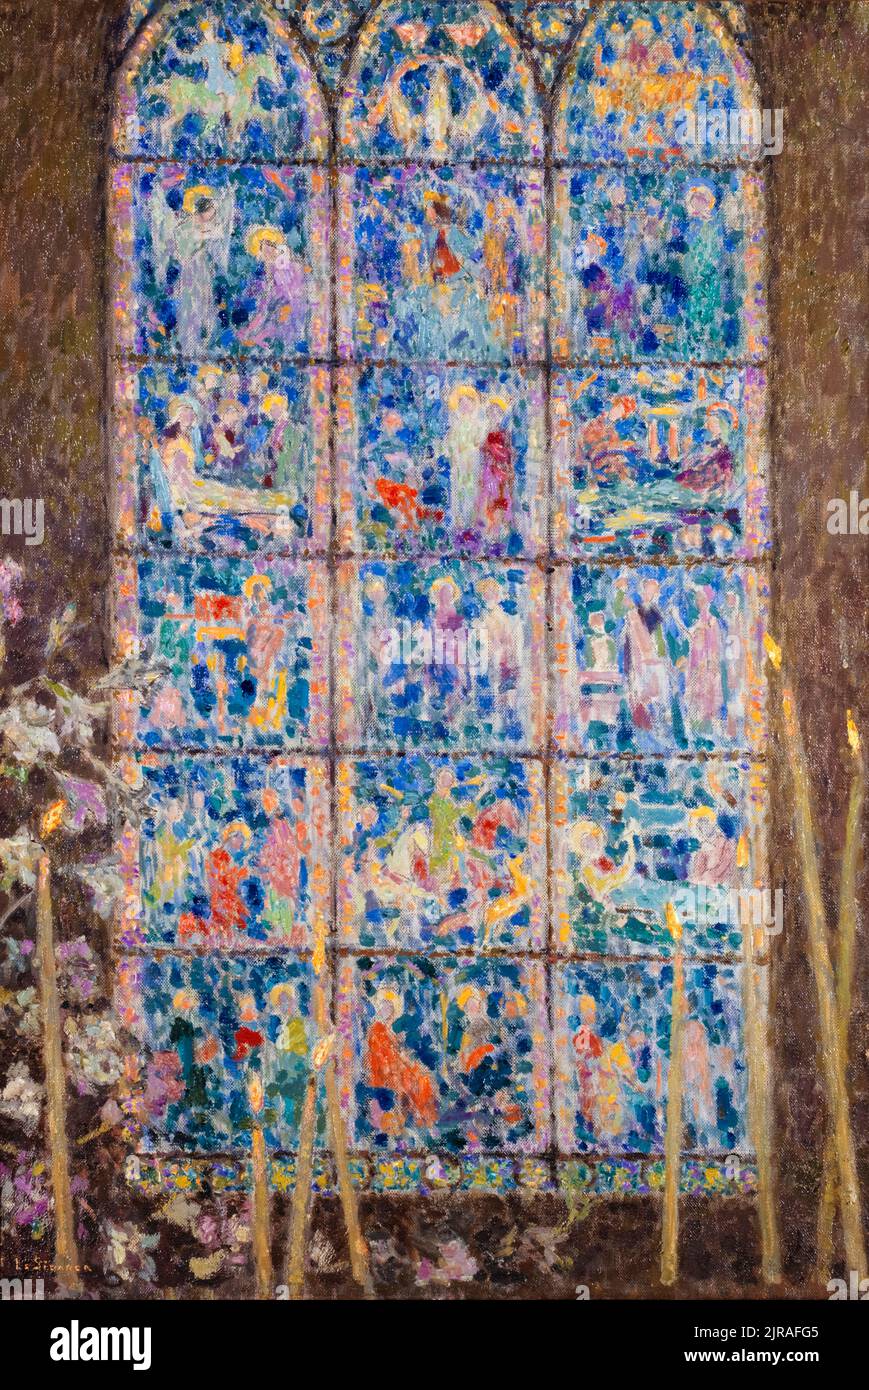 Henri Le Sidaner, Le Vitrail, Chartres, (The Stained Glass), painting in oil on canvas, 1901-1939 Stock Photo